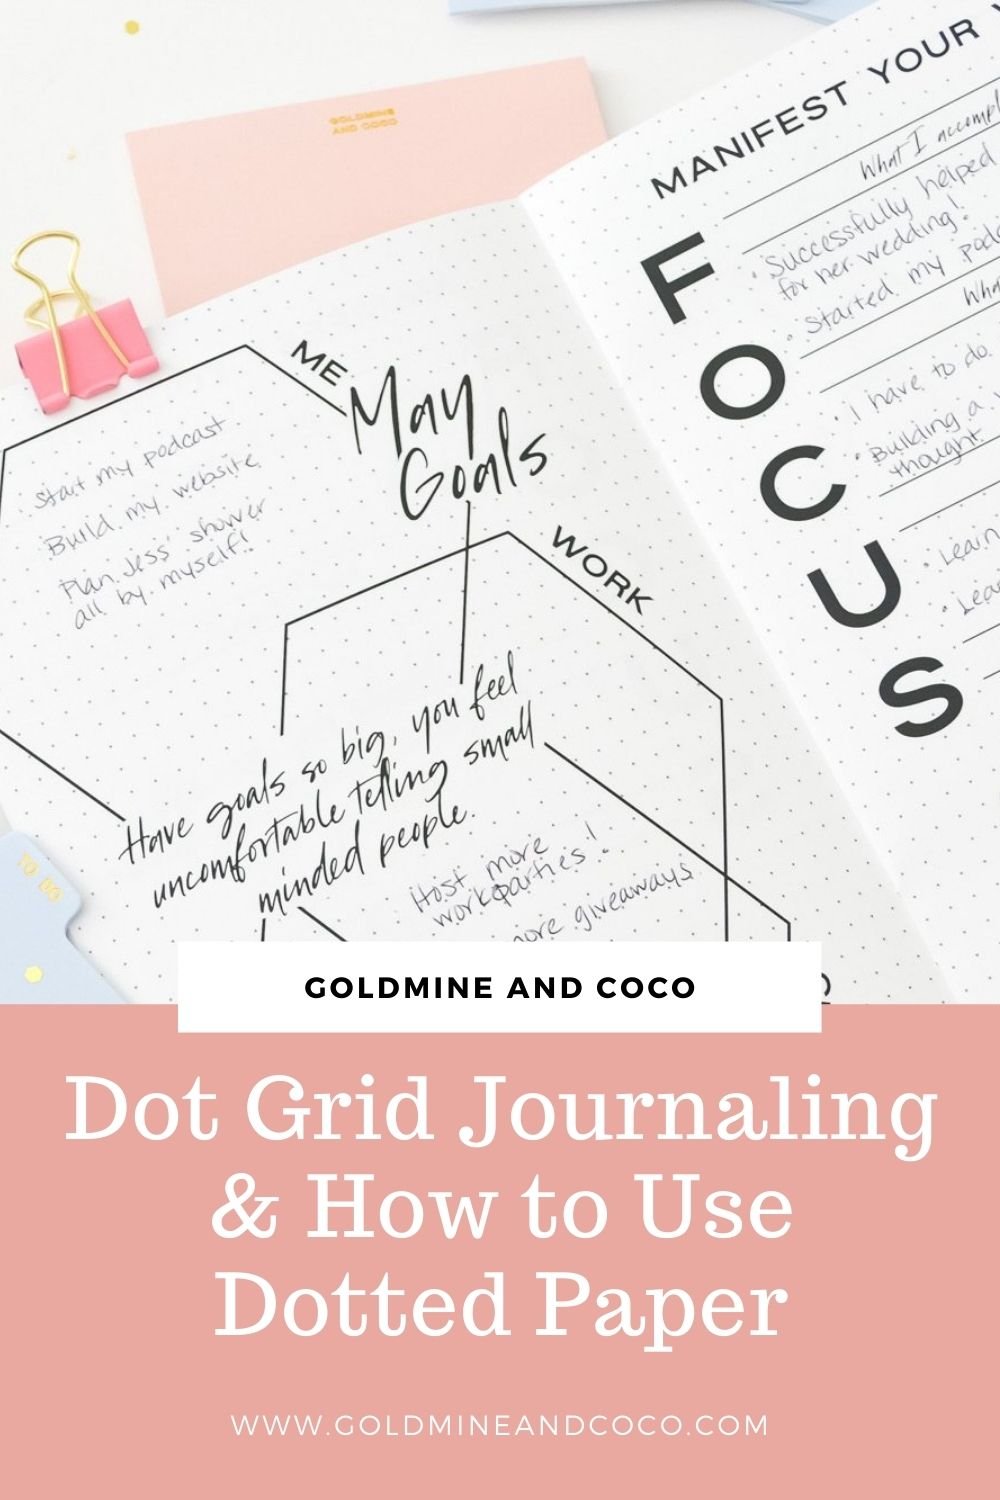 https://goldmineandcoco.com/cdn/shop/articles/dot-grid-journaling-the-5-best-ways-to-use-dotted-paper-975420_1000x.jpg?v=1682542720